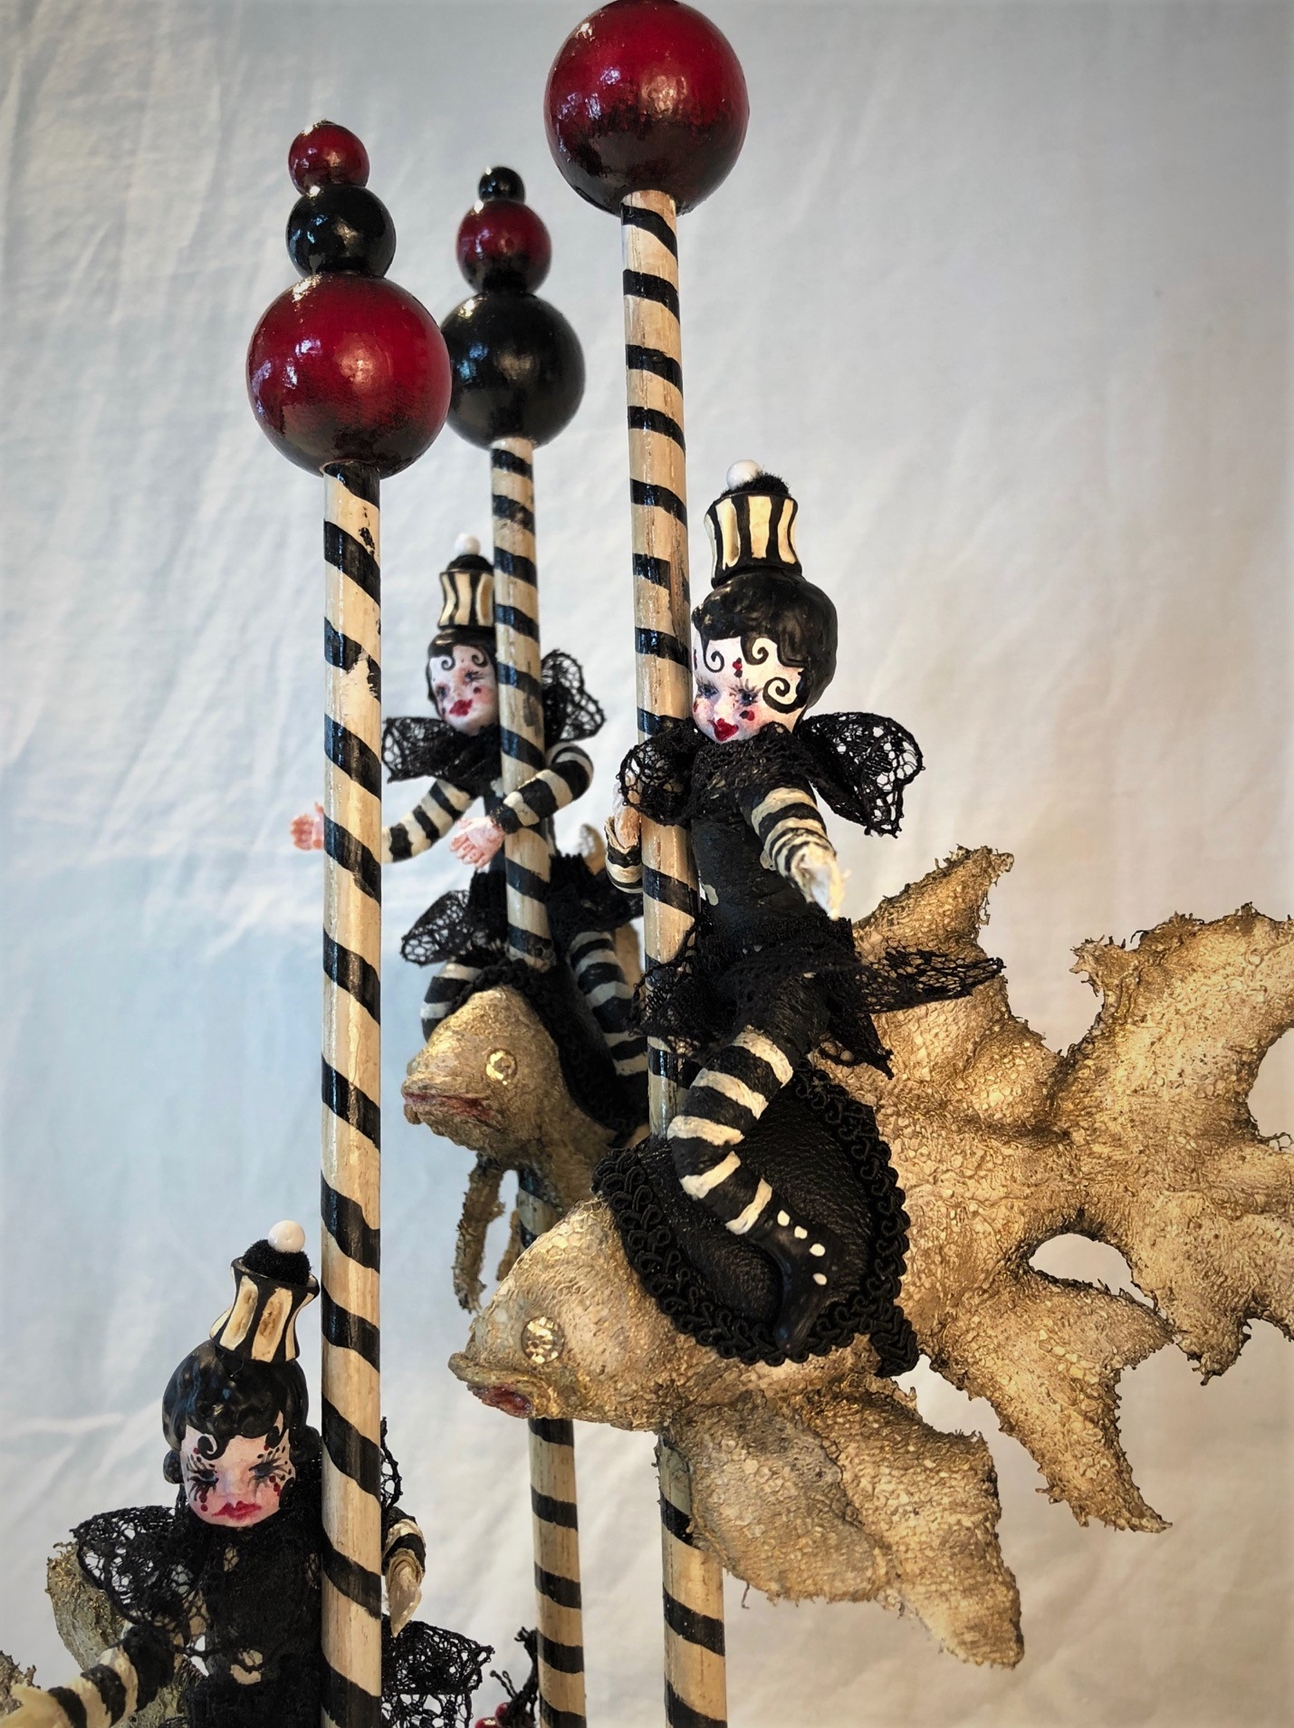 mixed media striped three miniature gothic sprites circus performers wearing black and white ride carousel fish in a garden of black roses